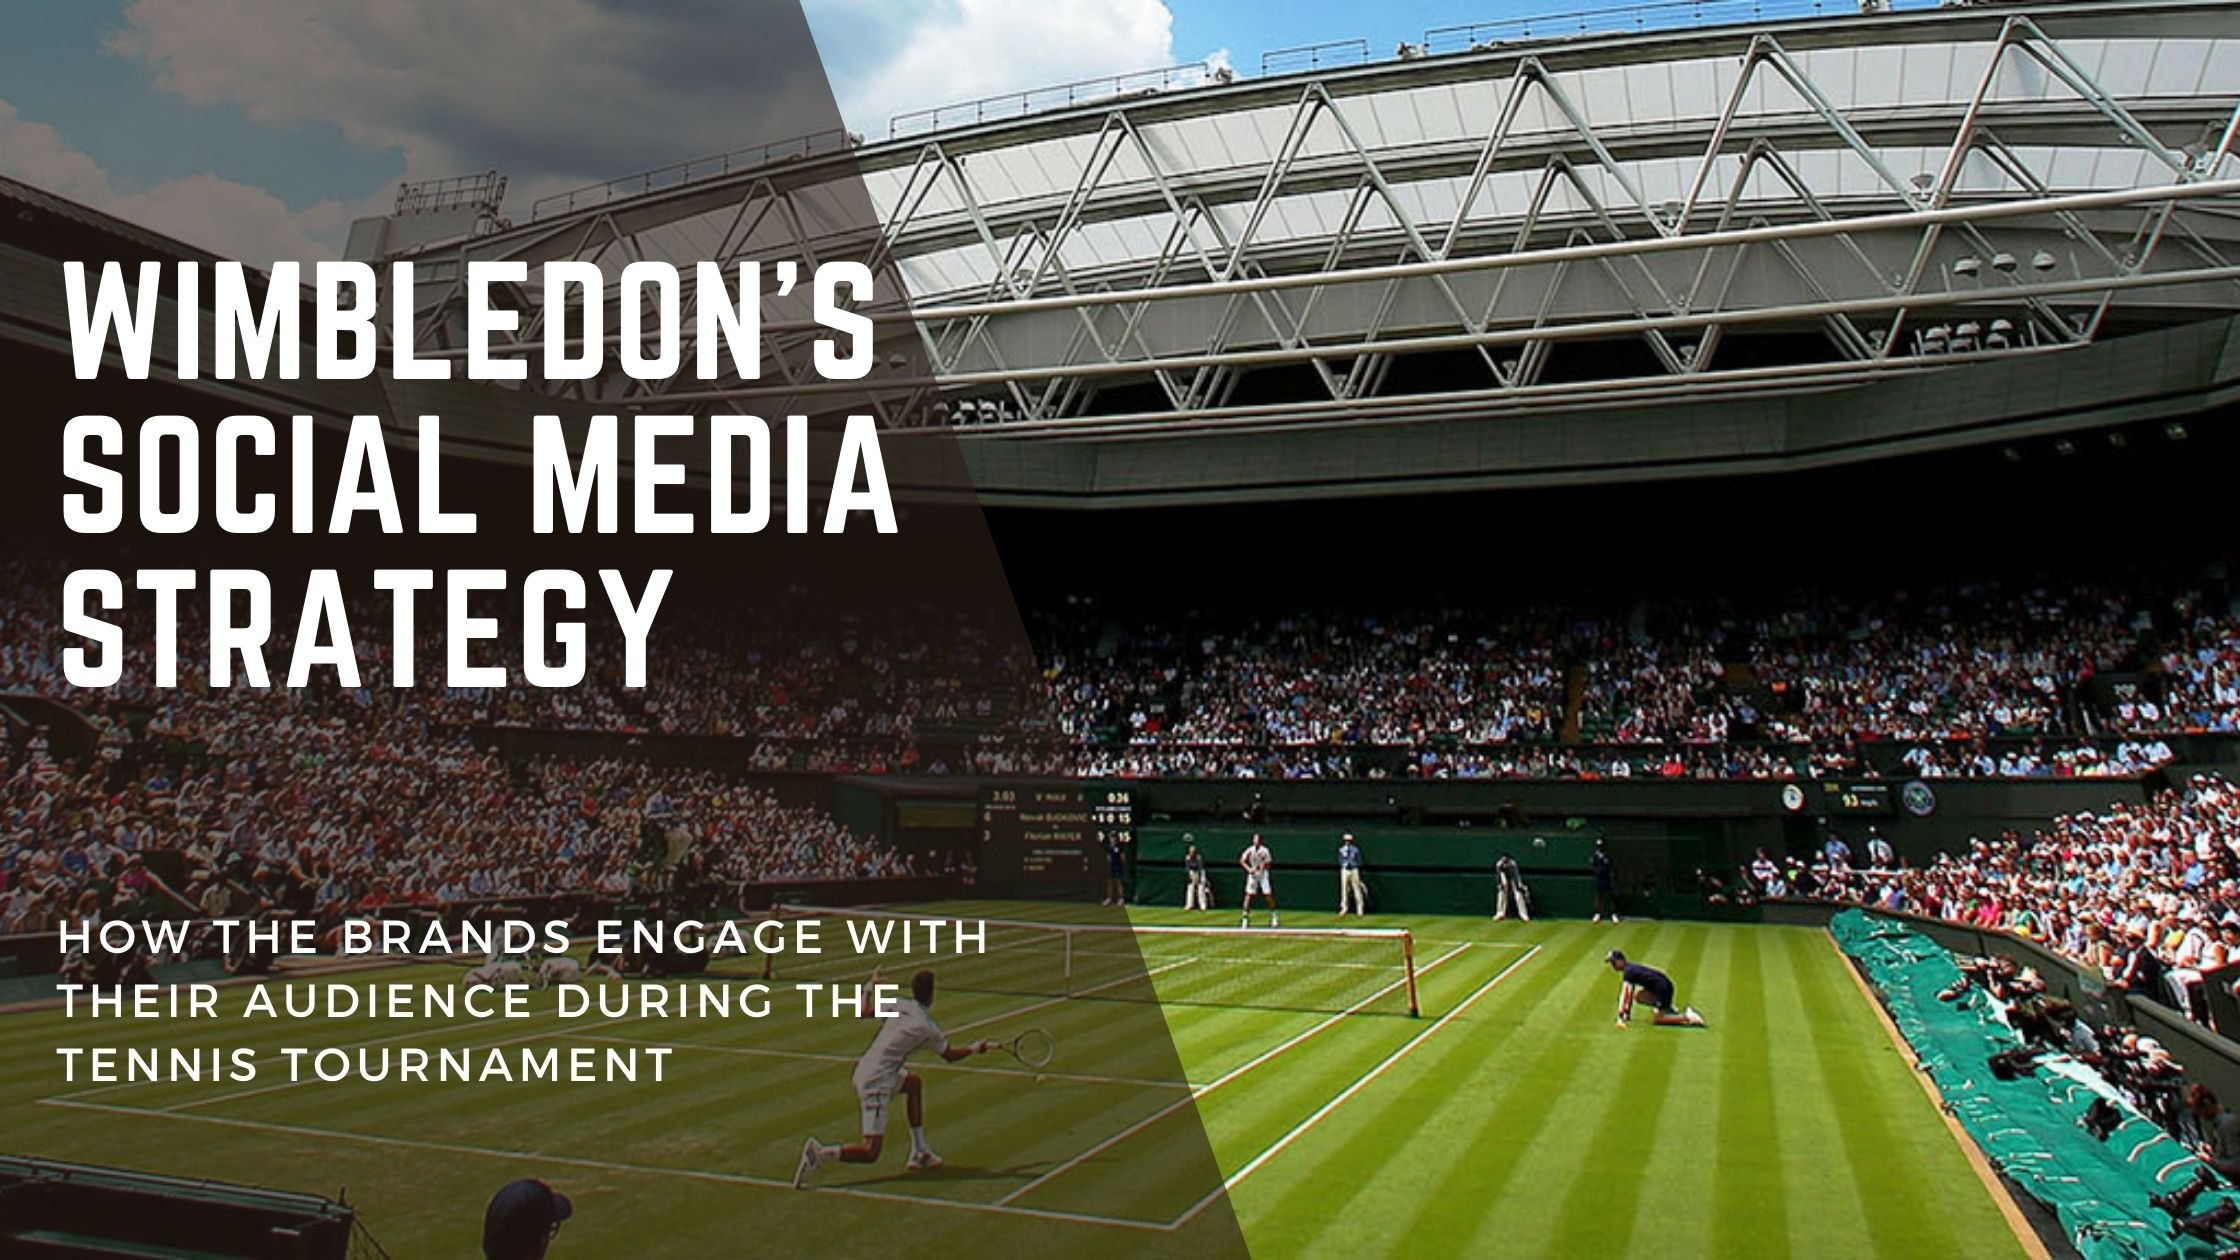 Scenes From On and Off the Court at Wimbledon 2022